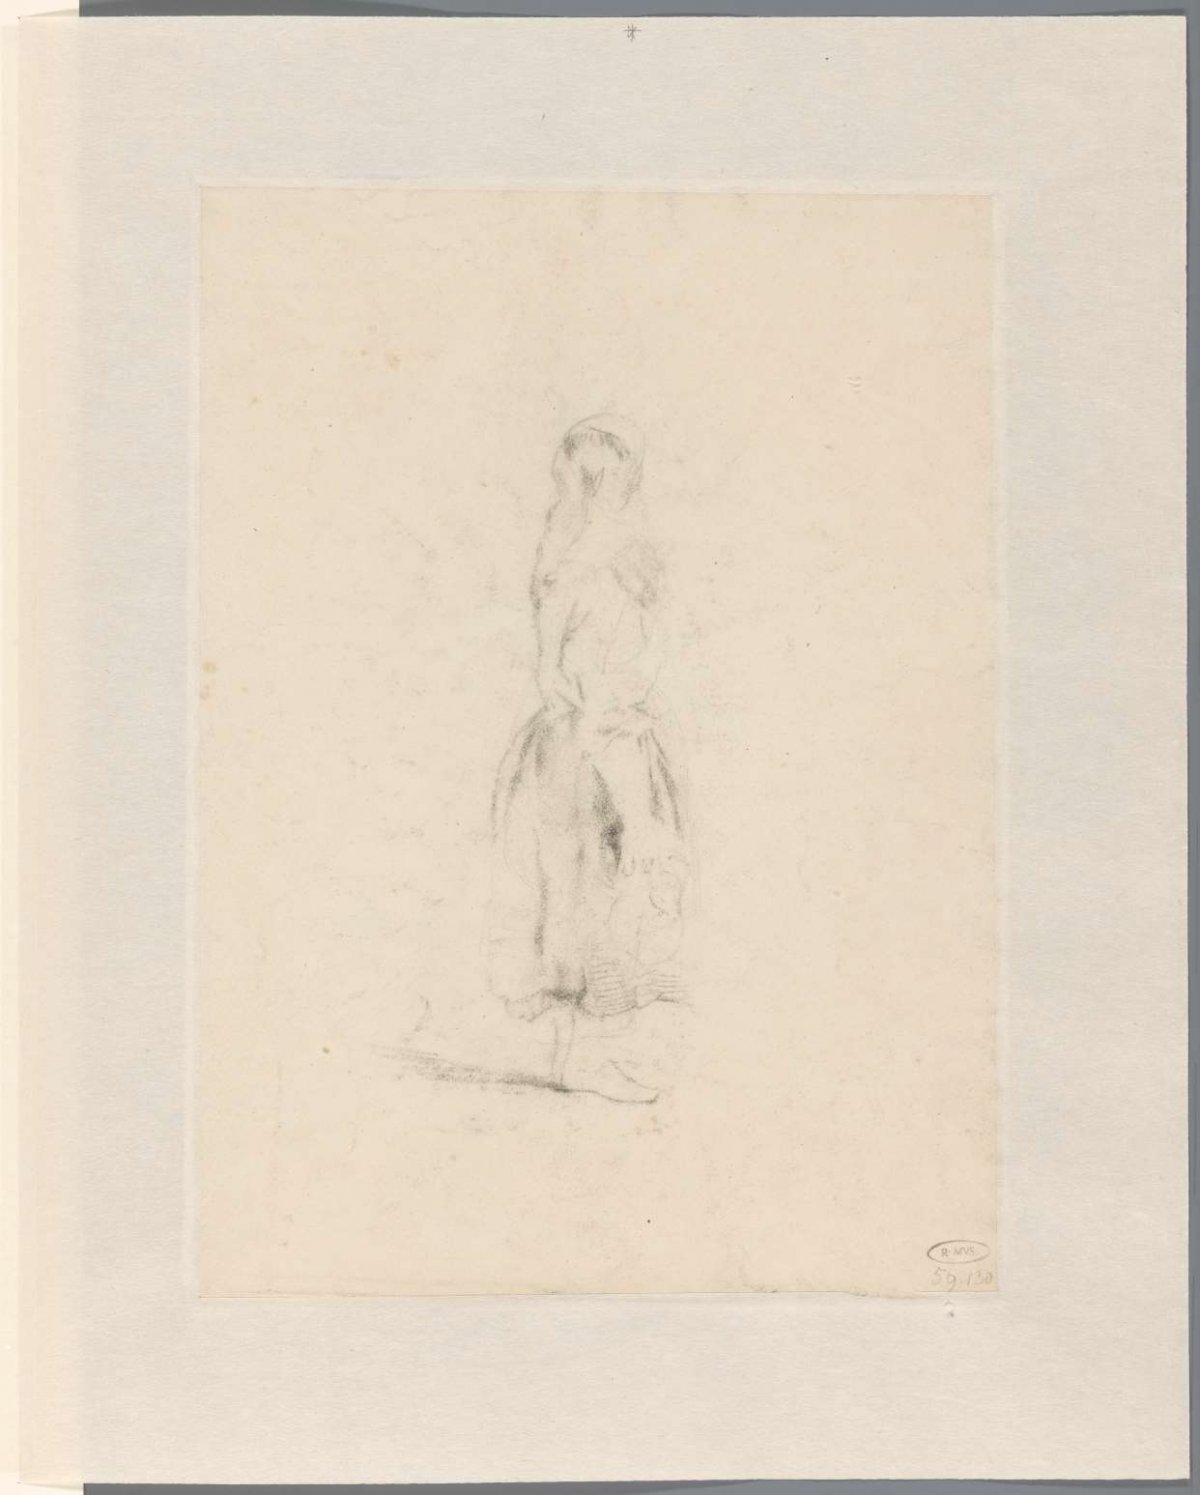 Sketch of standing young woman, en profil to the right, Anton Mauve, 1848 - 1888